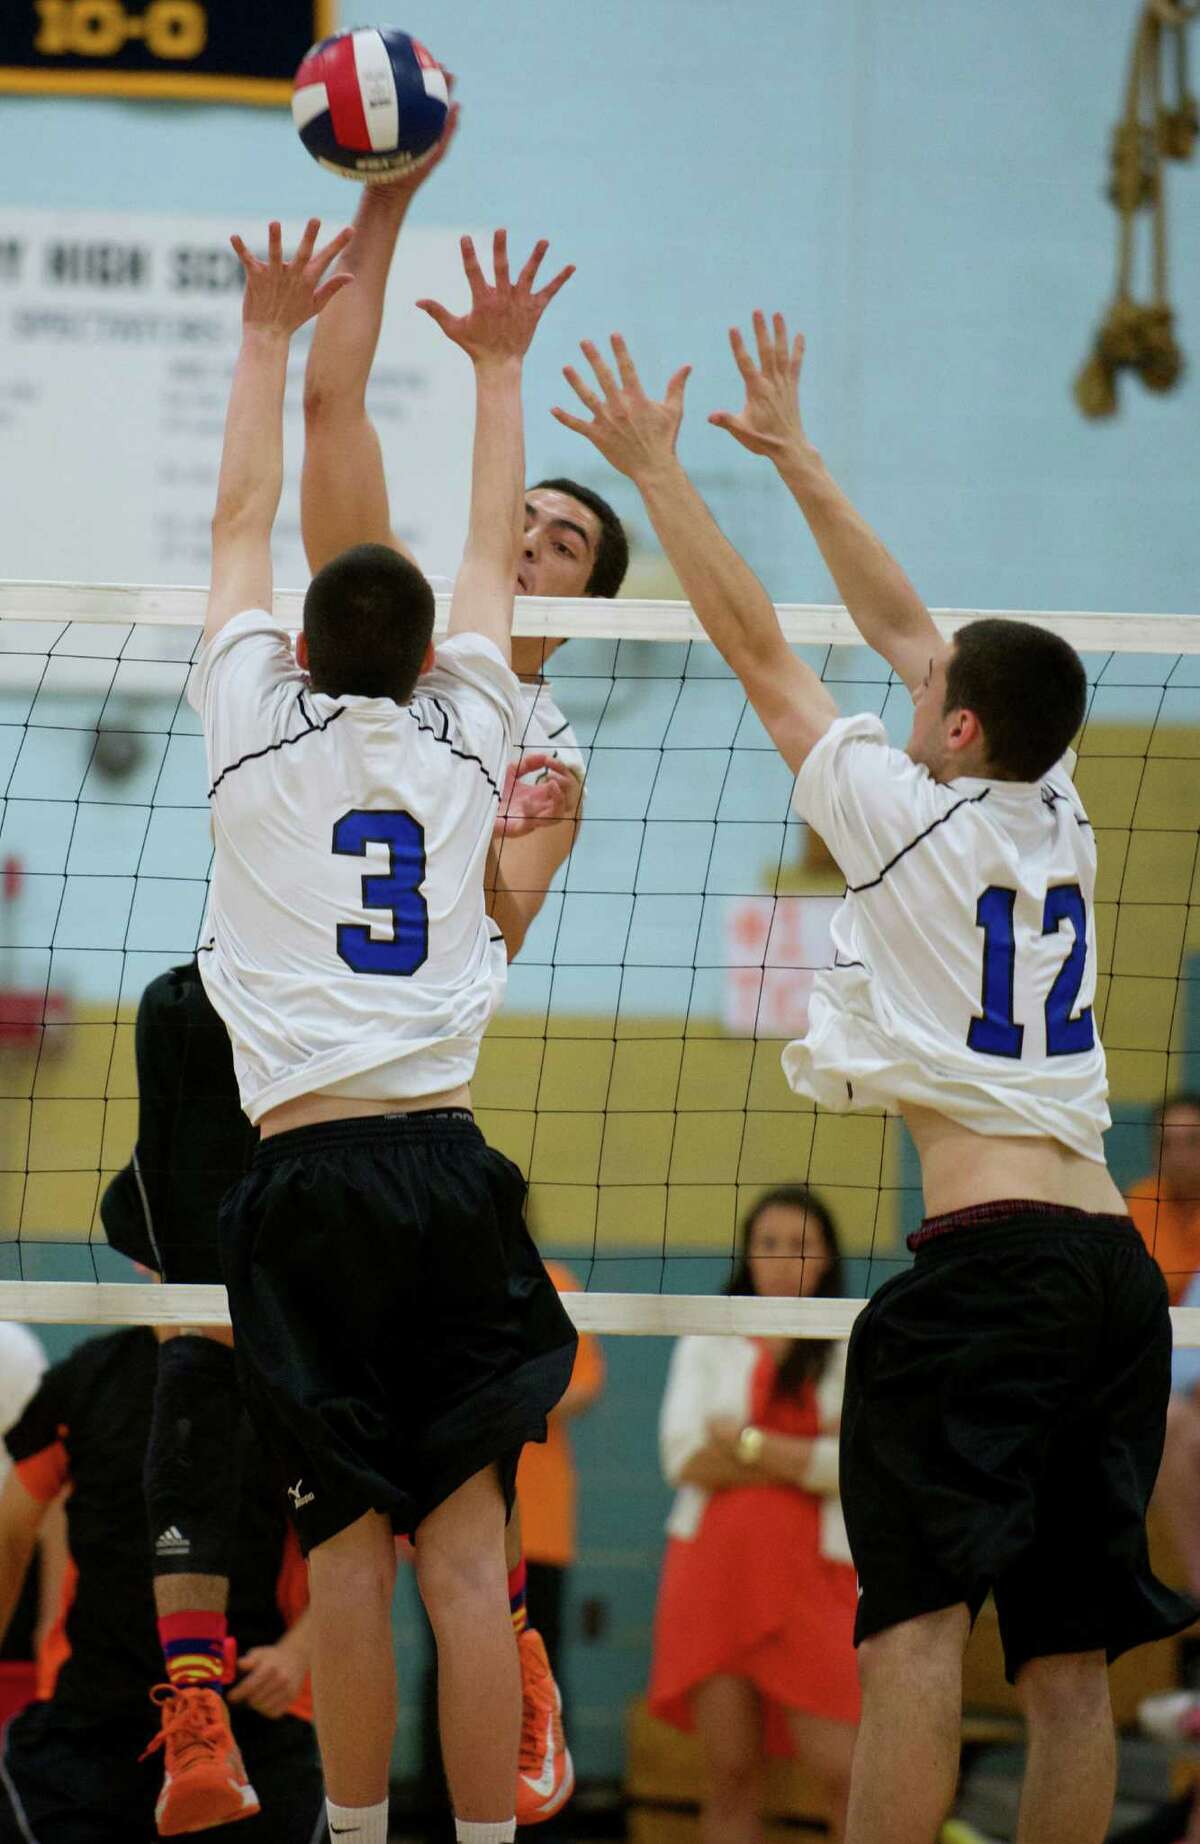 Ridgefield's Griffin Jones, #11, spikes the ball over Southington's David Shaughnessy, #3, and Daniel Normandin, #12, during the Class L boys volleyball state championship game between Southington and Ridgefield high schools played at John F. Kennedy High School in Waterbury, Conn, on Thursday, June 12, 2014.